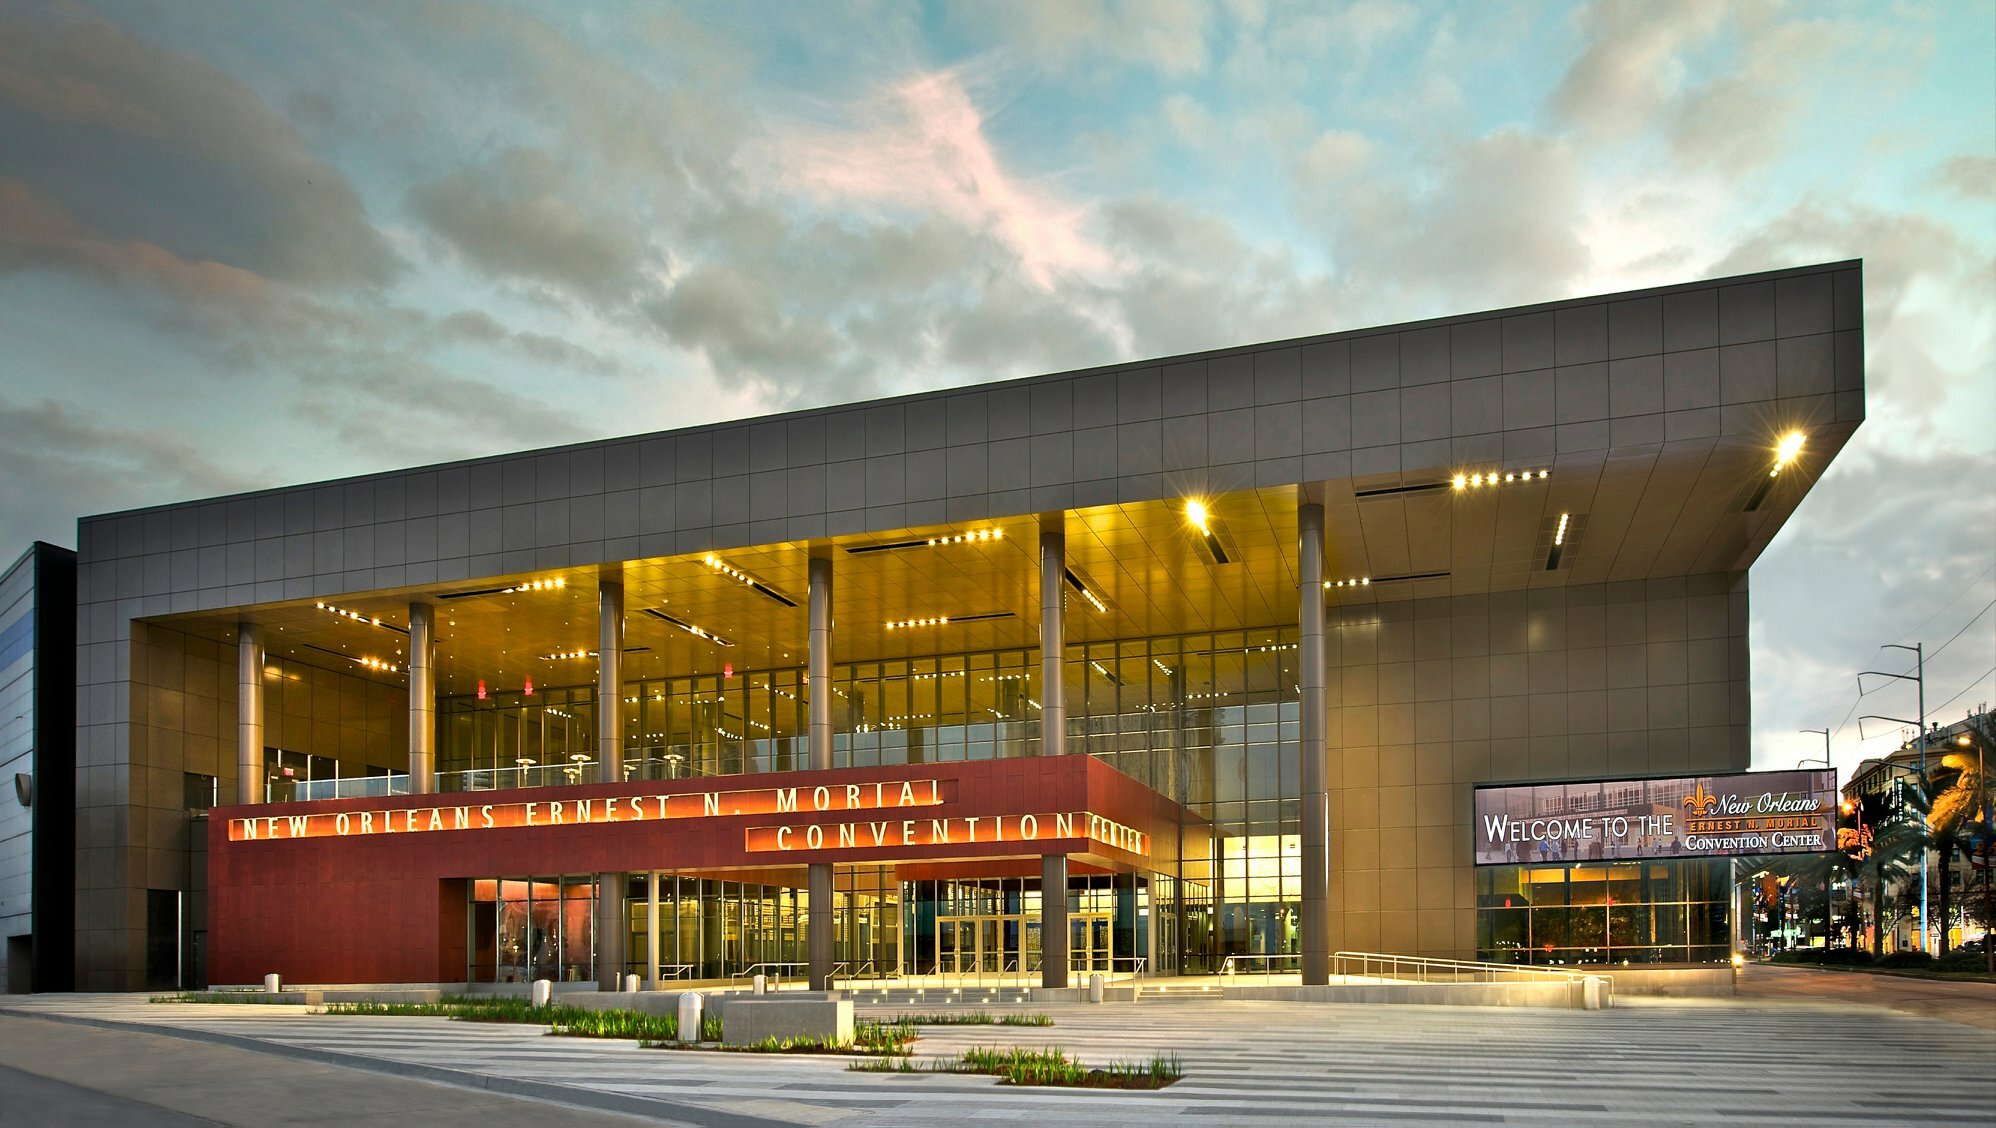 Photo of New Orleans Ernest N. Morial Convention Center, New Orleans, LA